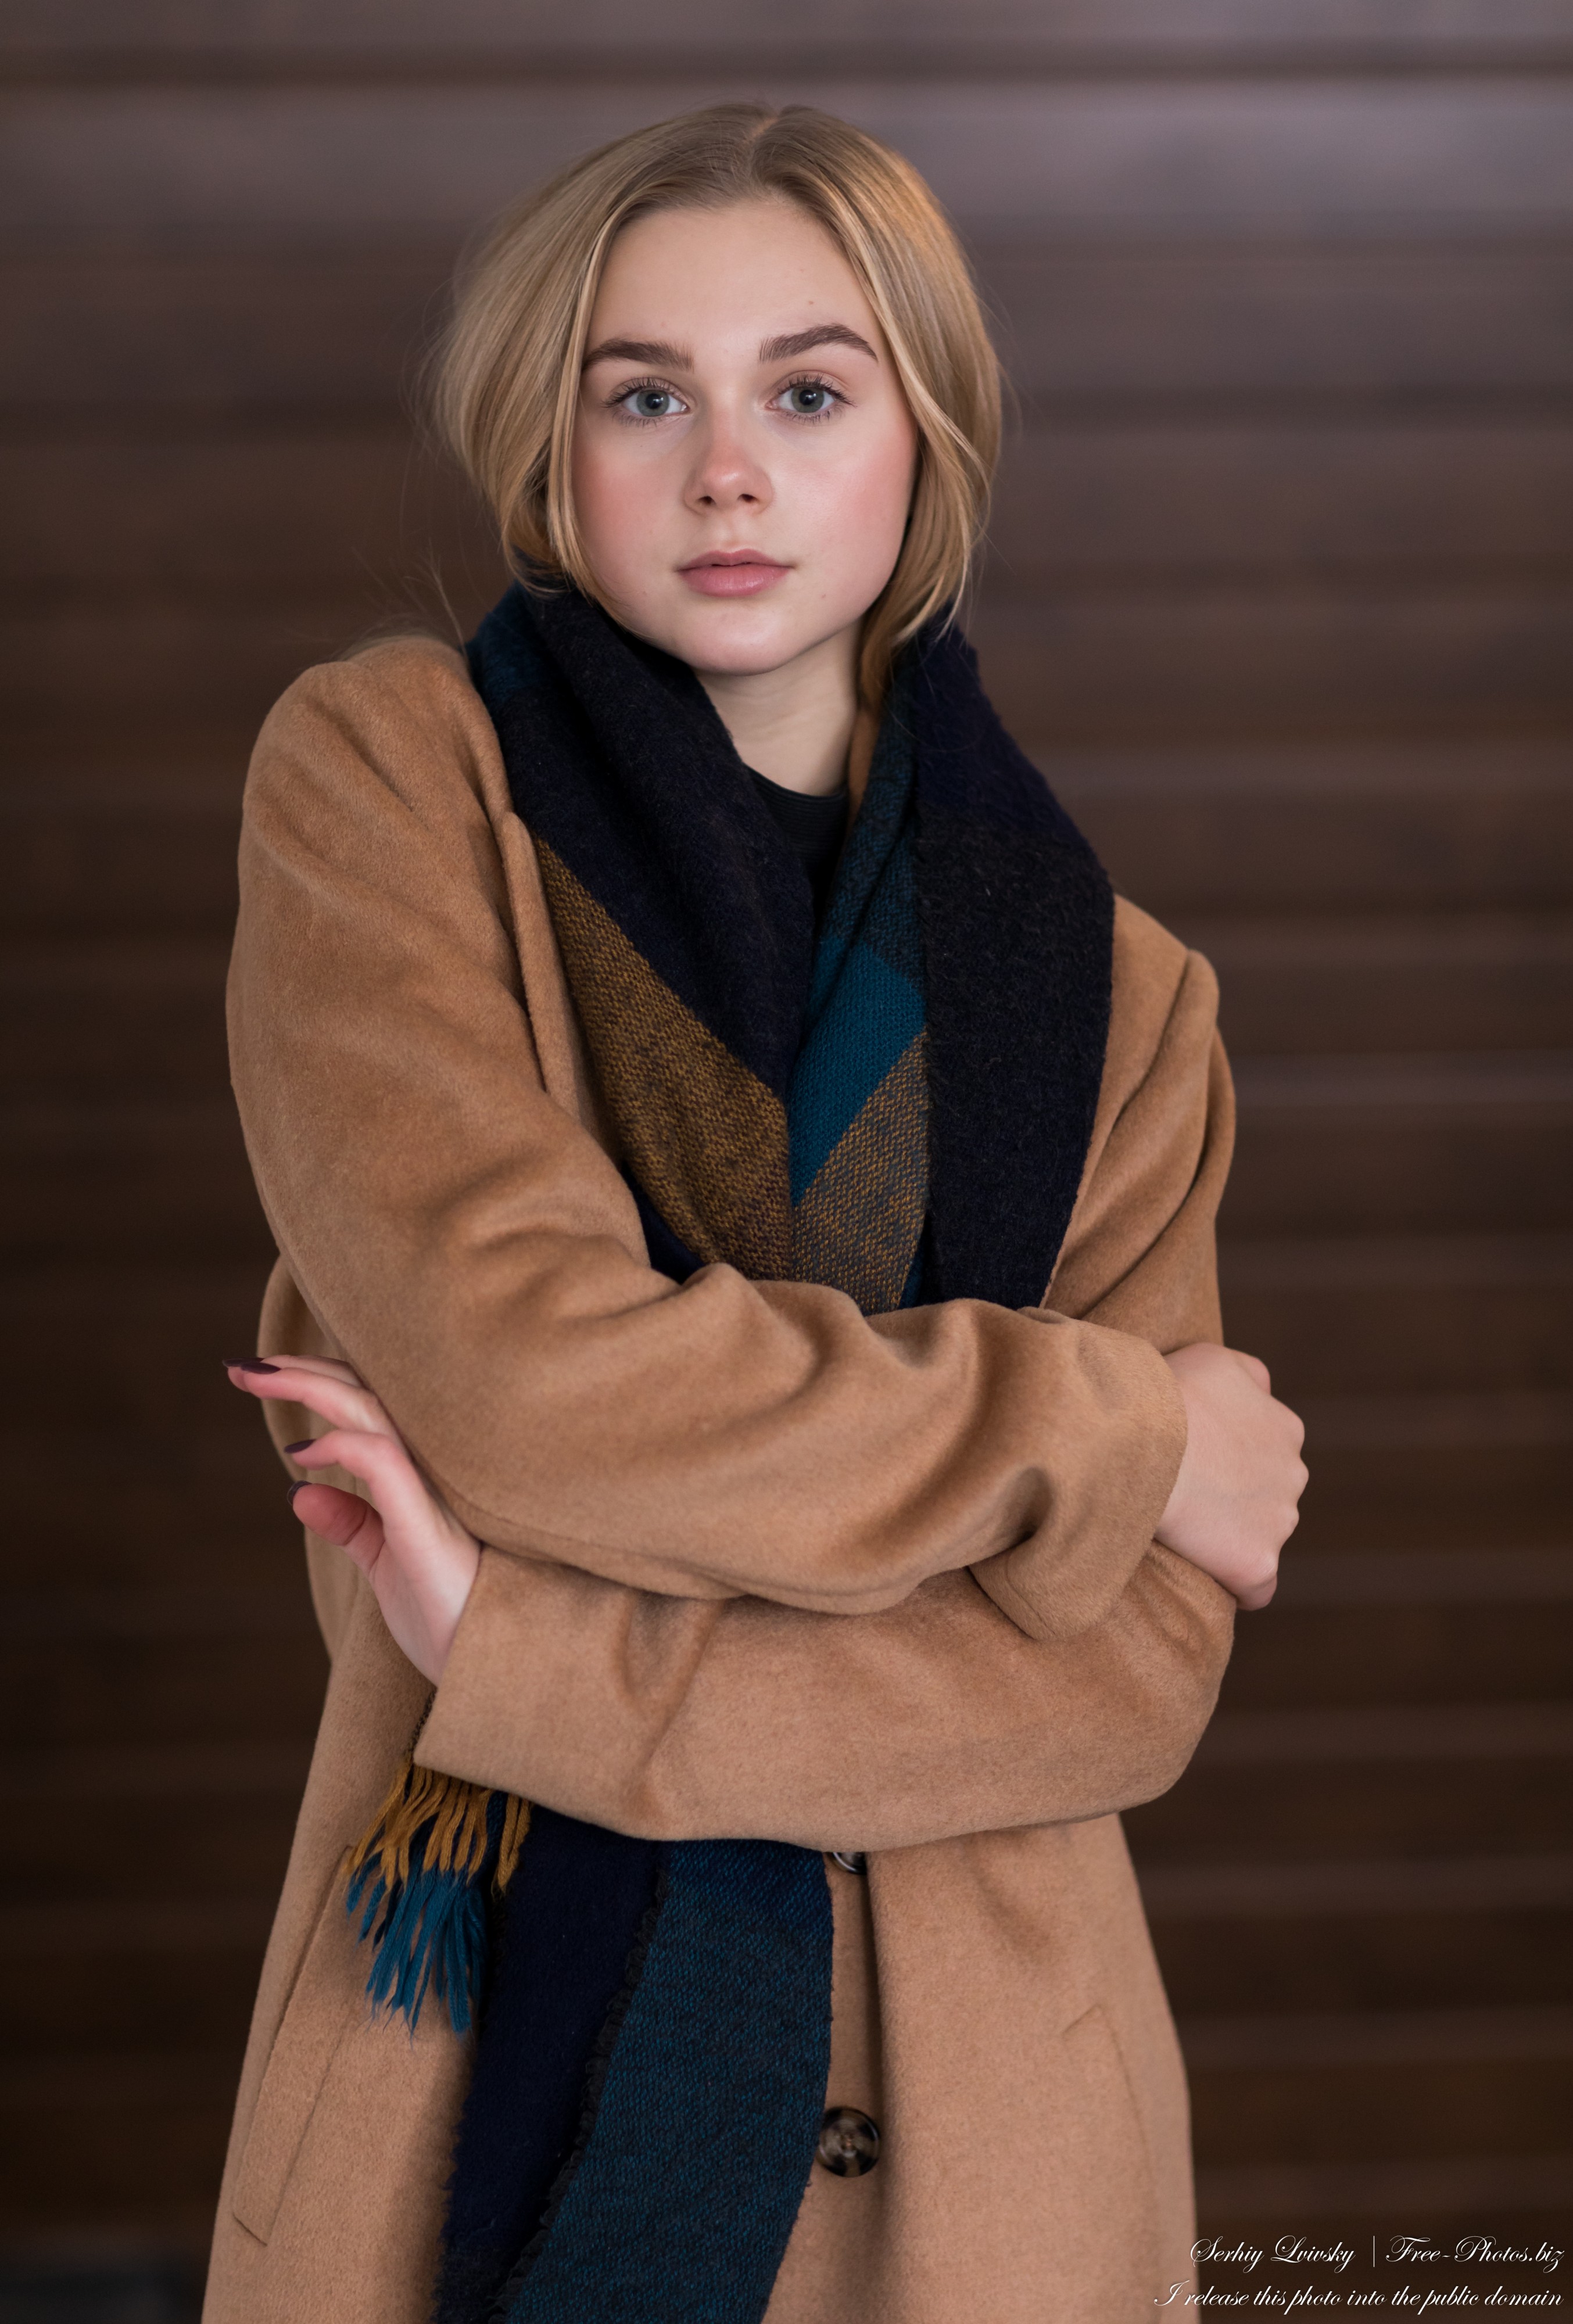 Emilia - a 15-year-old natural blonde Catholic girl photographed in November 2020 by Serhiy Lvivsky, picture 18